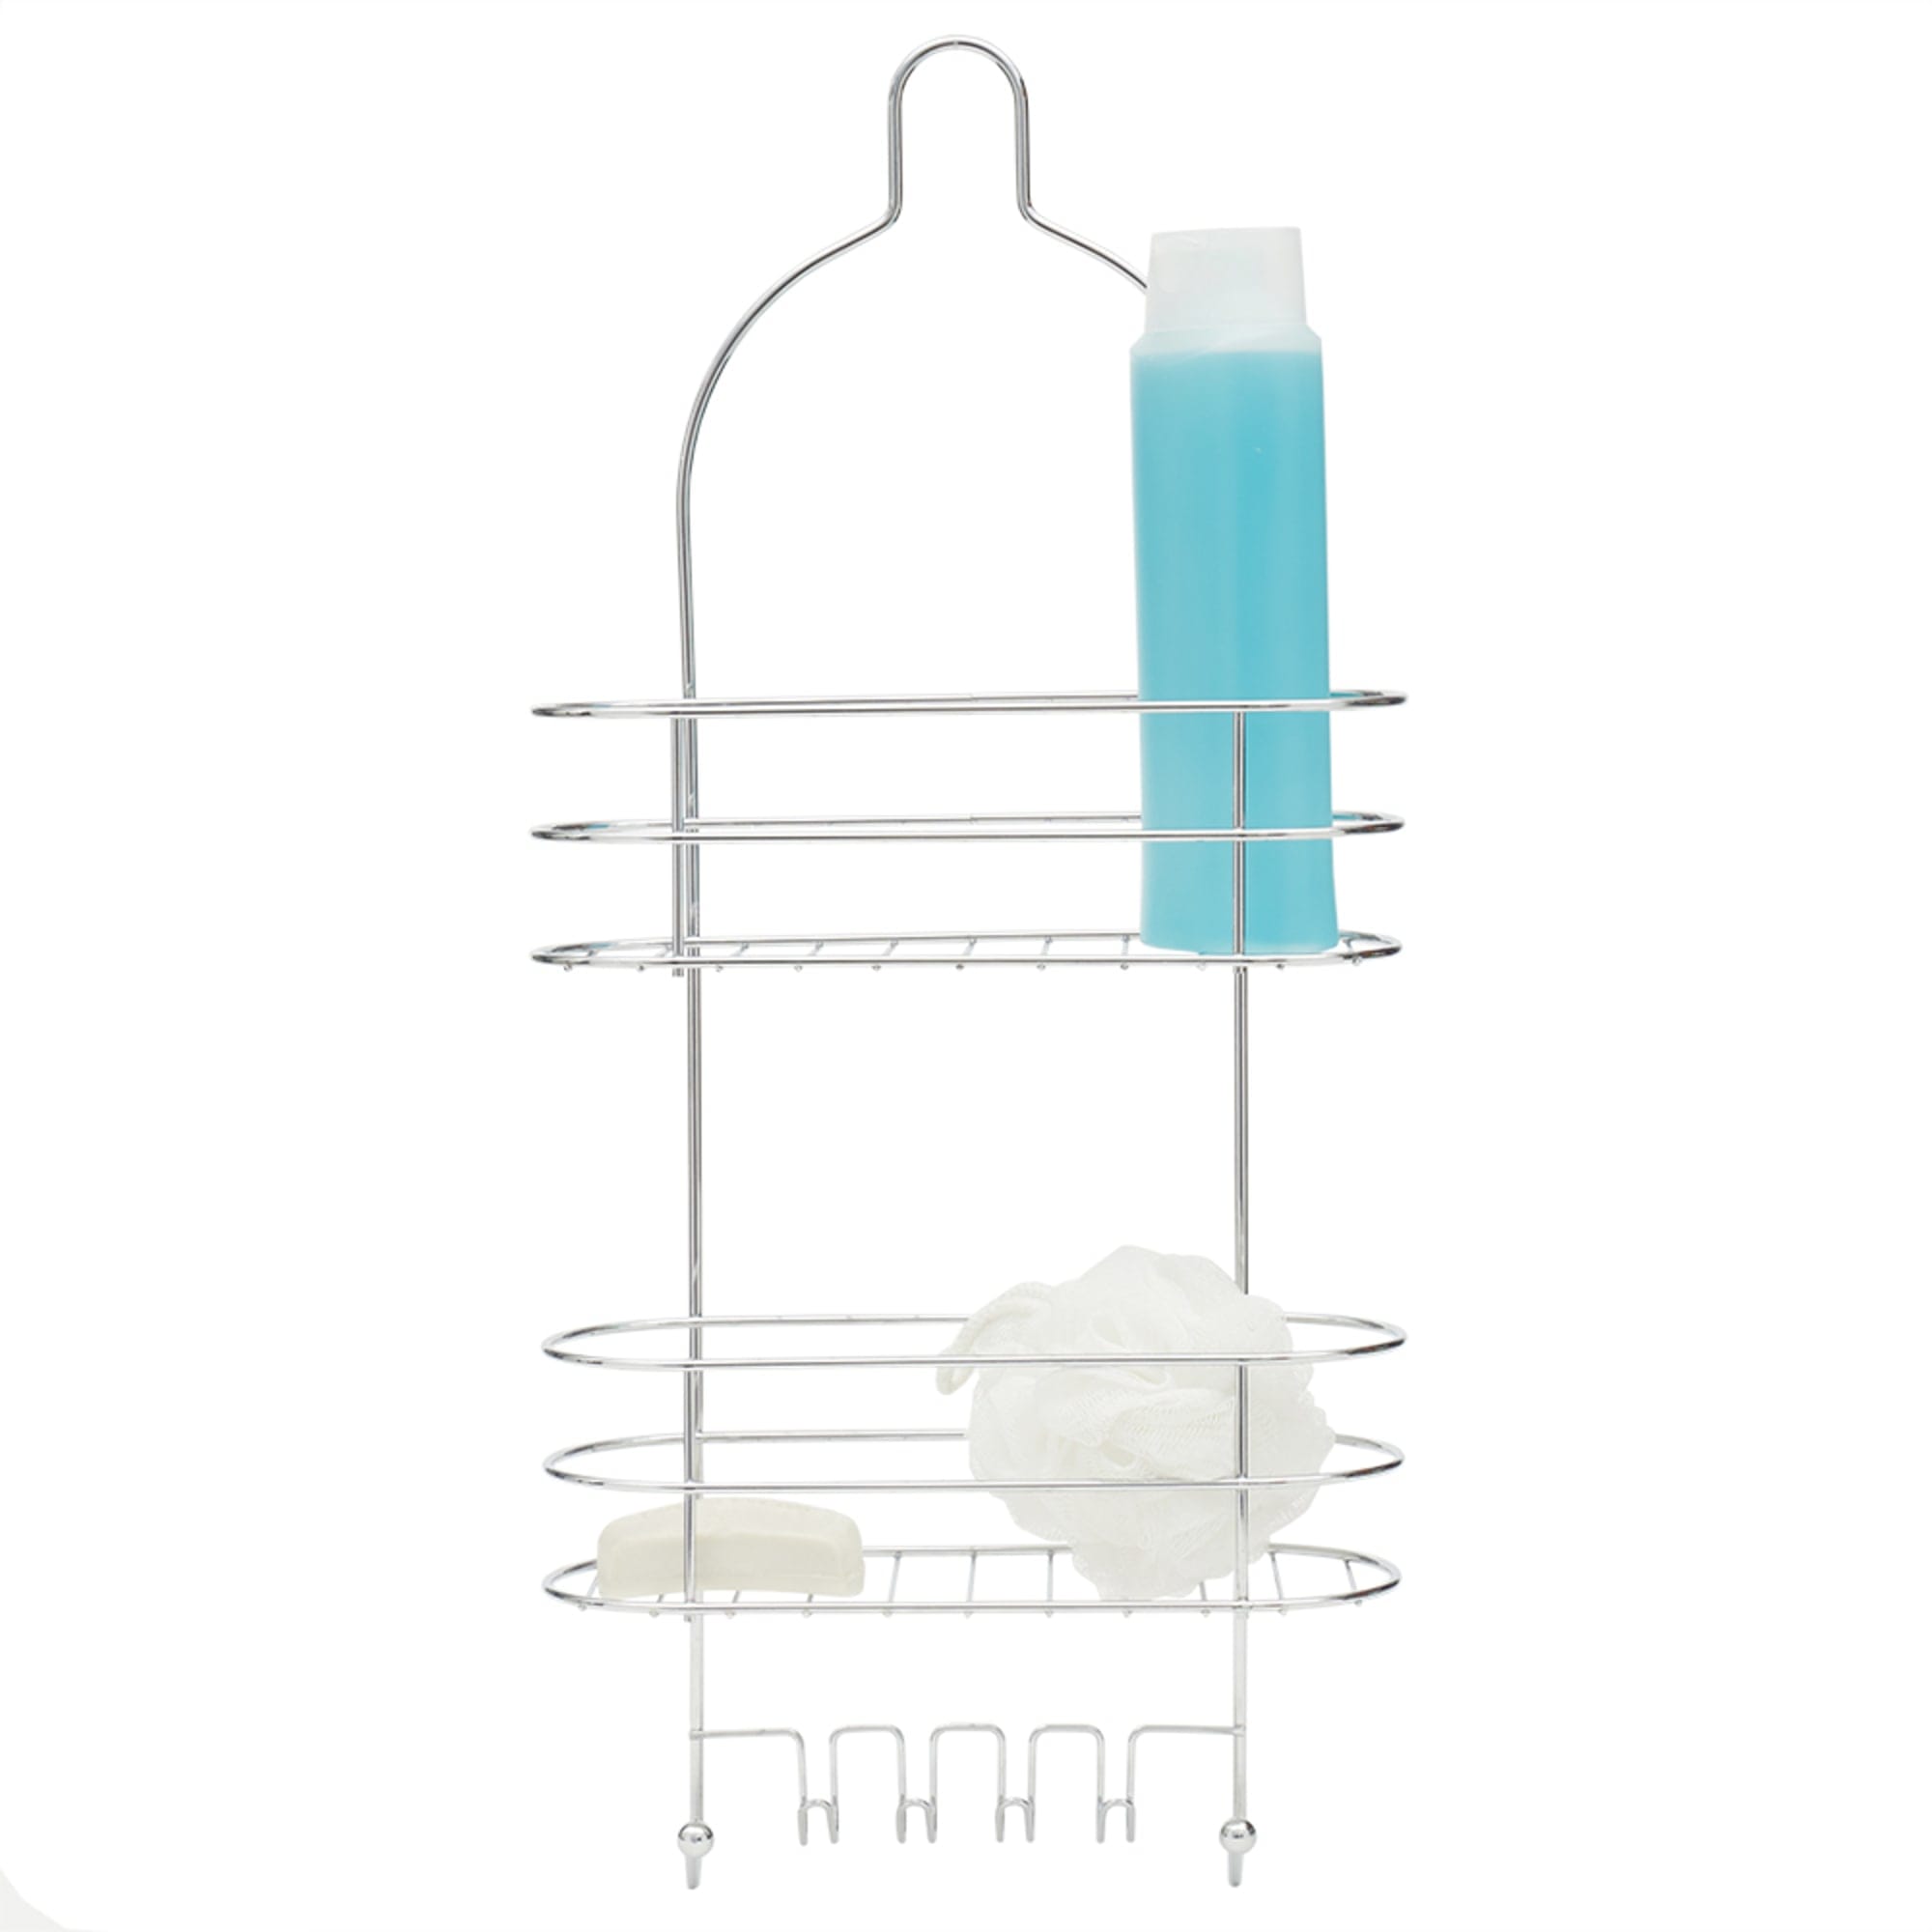 Home Basics 2 Tier Wire Shower Caddy, Chrome $10.00 EACH, CASE PACK OF 6